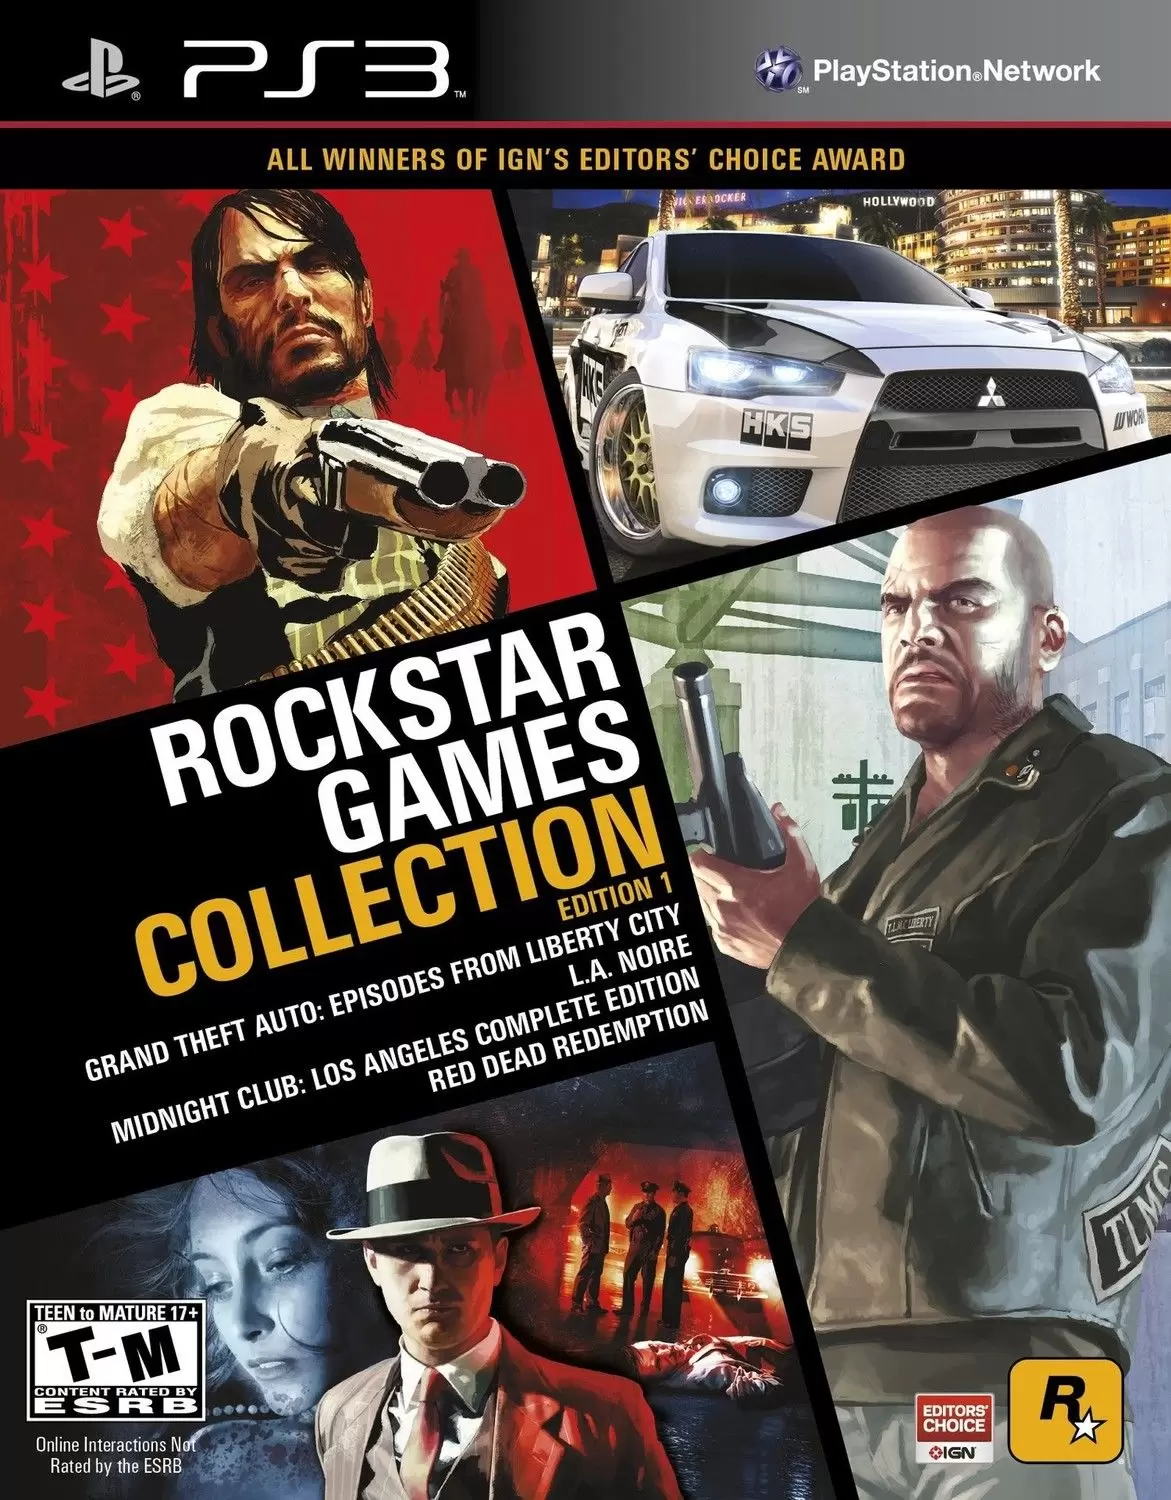 Jeux PS3 - Rockstar Games Collection: Edition 1